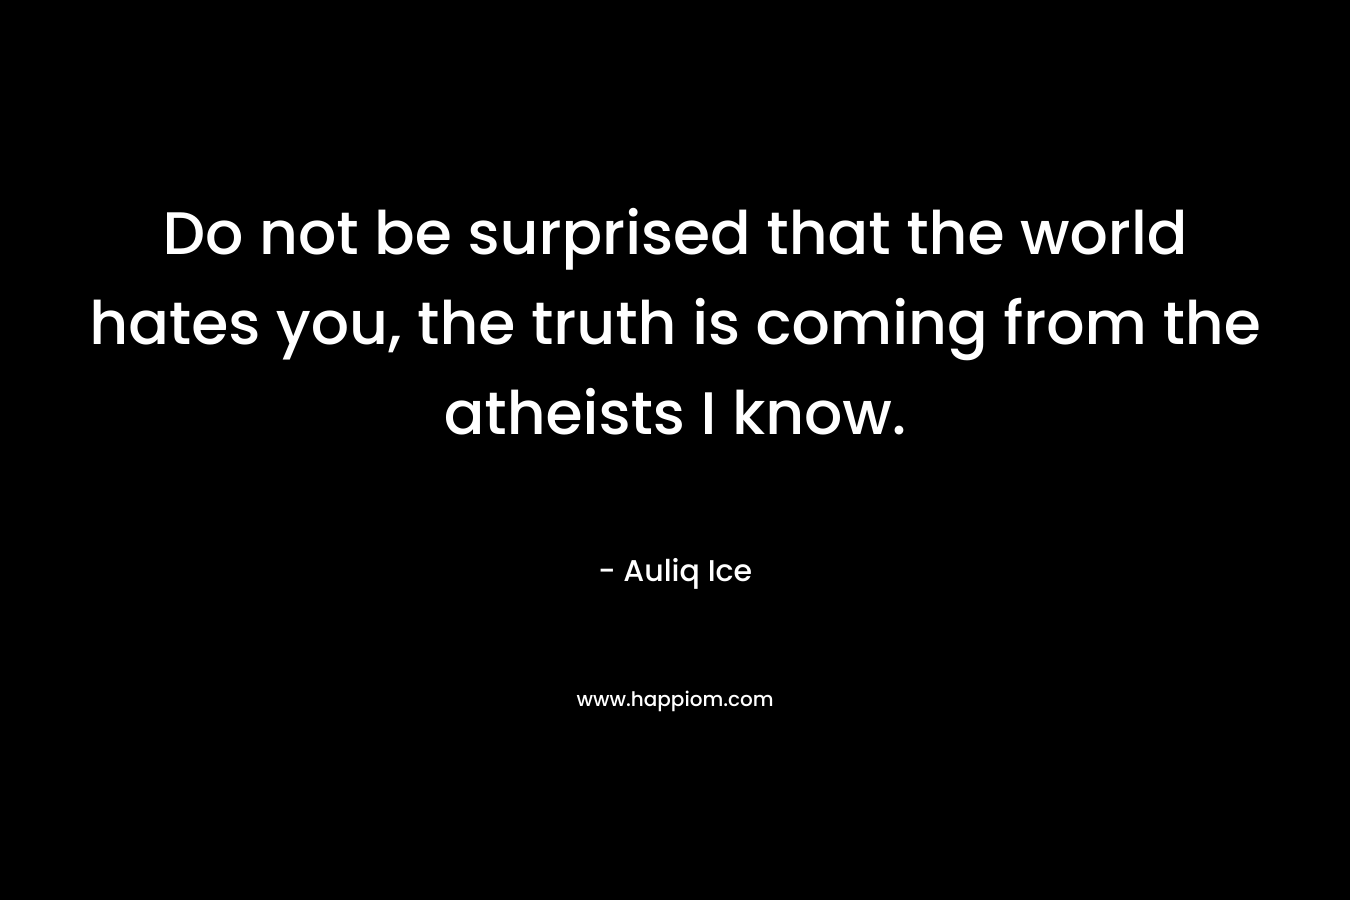 Do not be surprised that the world hates you, the truth is coming from the atheists I know. – Auliq Ice